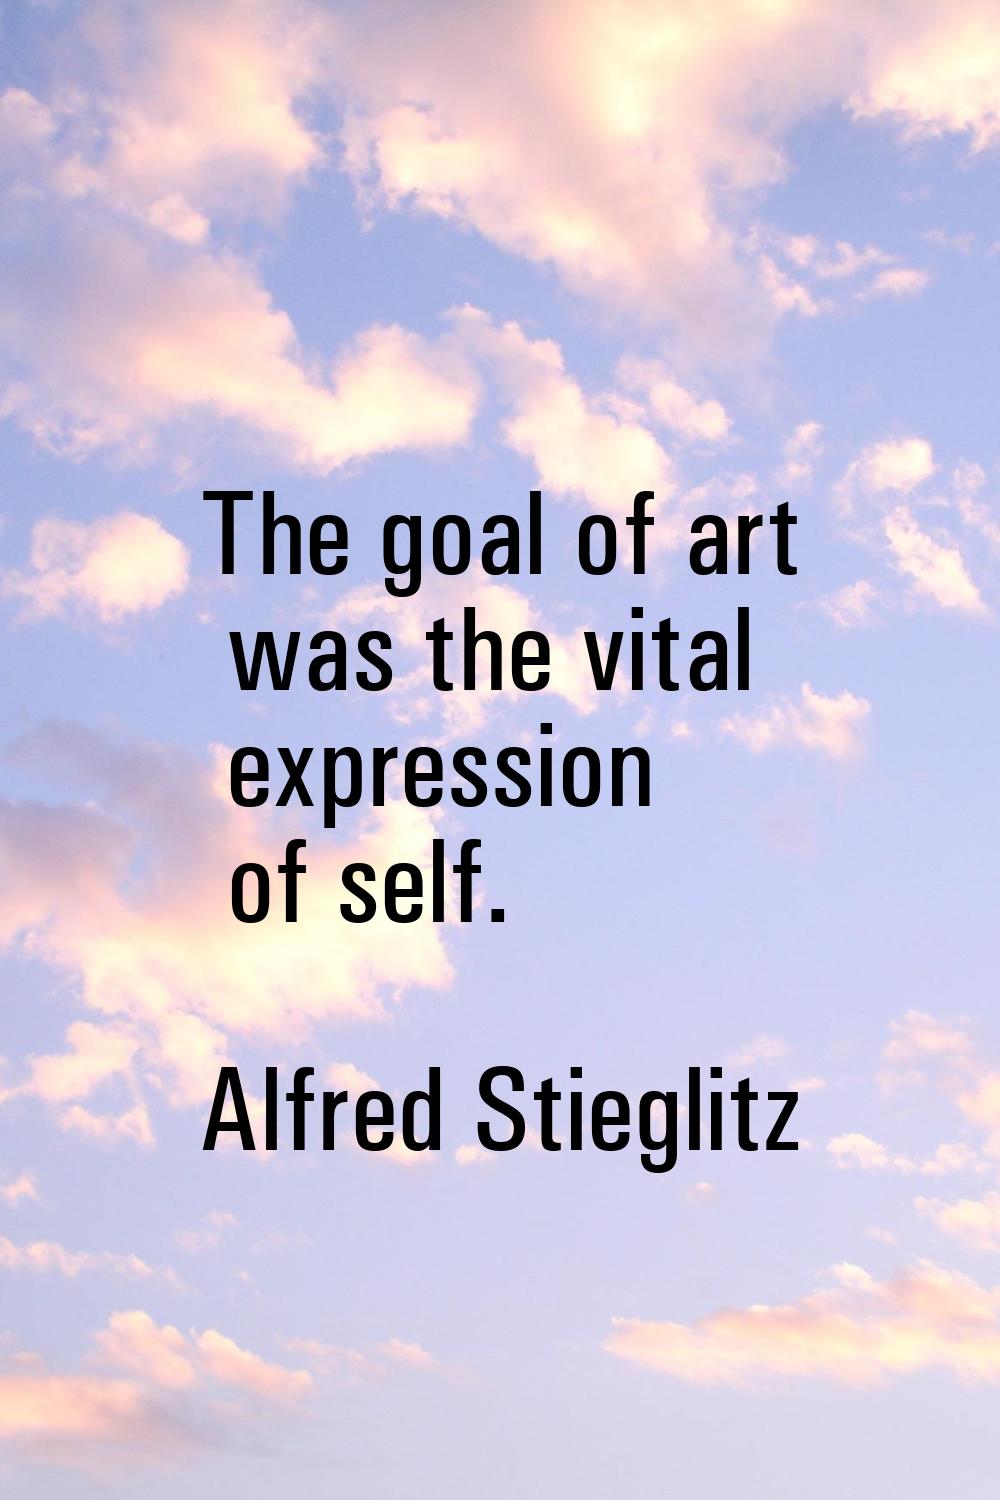 The goal of art was the vital expression of self.